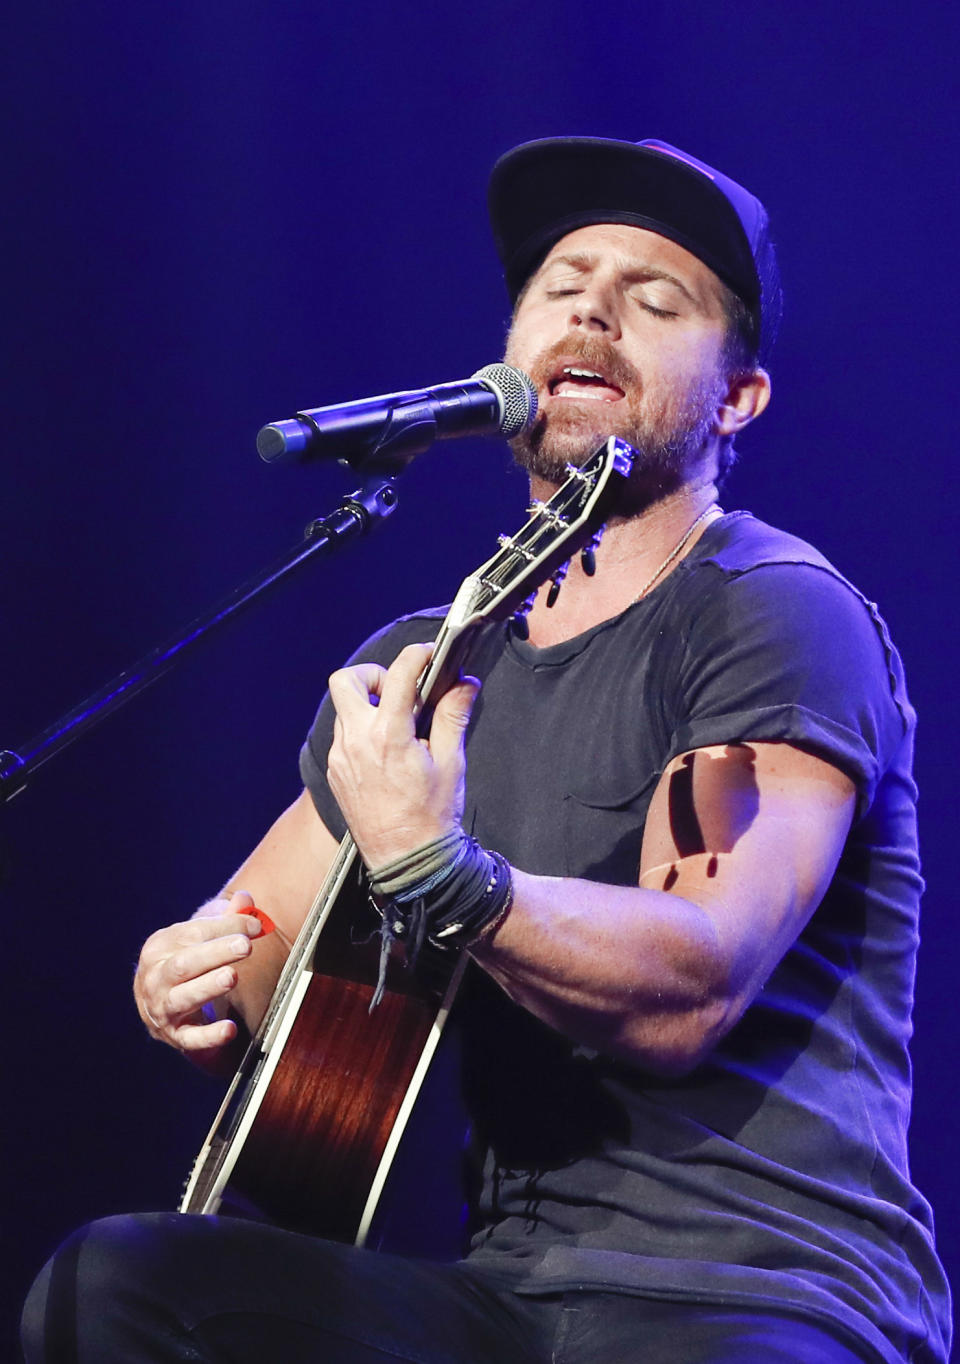 FILE - This Sept. 19, 2018 file photo shows Kip Moore performing at the 2018 Nashville Songwriters Awards in Nashville, Tenn. Moore was used to traveling the world to surf, rock climb or hike, but lately he's been isolating himself in a remote lodge in eastern Kentucky. The Georgia-born artist releases his new album “Wild World,” in a very chaotic time, but he said his introspective messages might help people right now. (Photo by Al Wagner/Invision/AP, File)